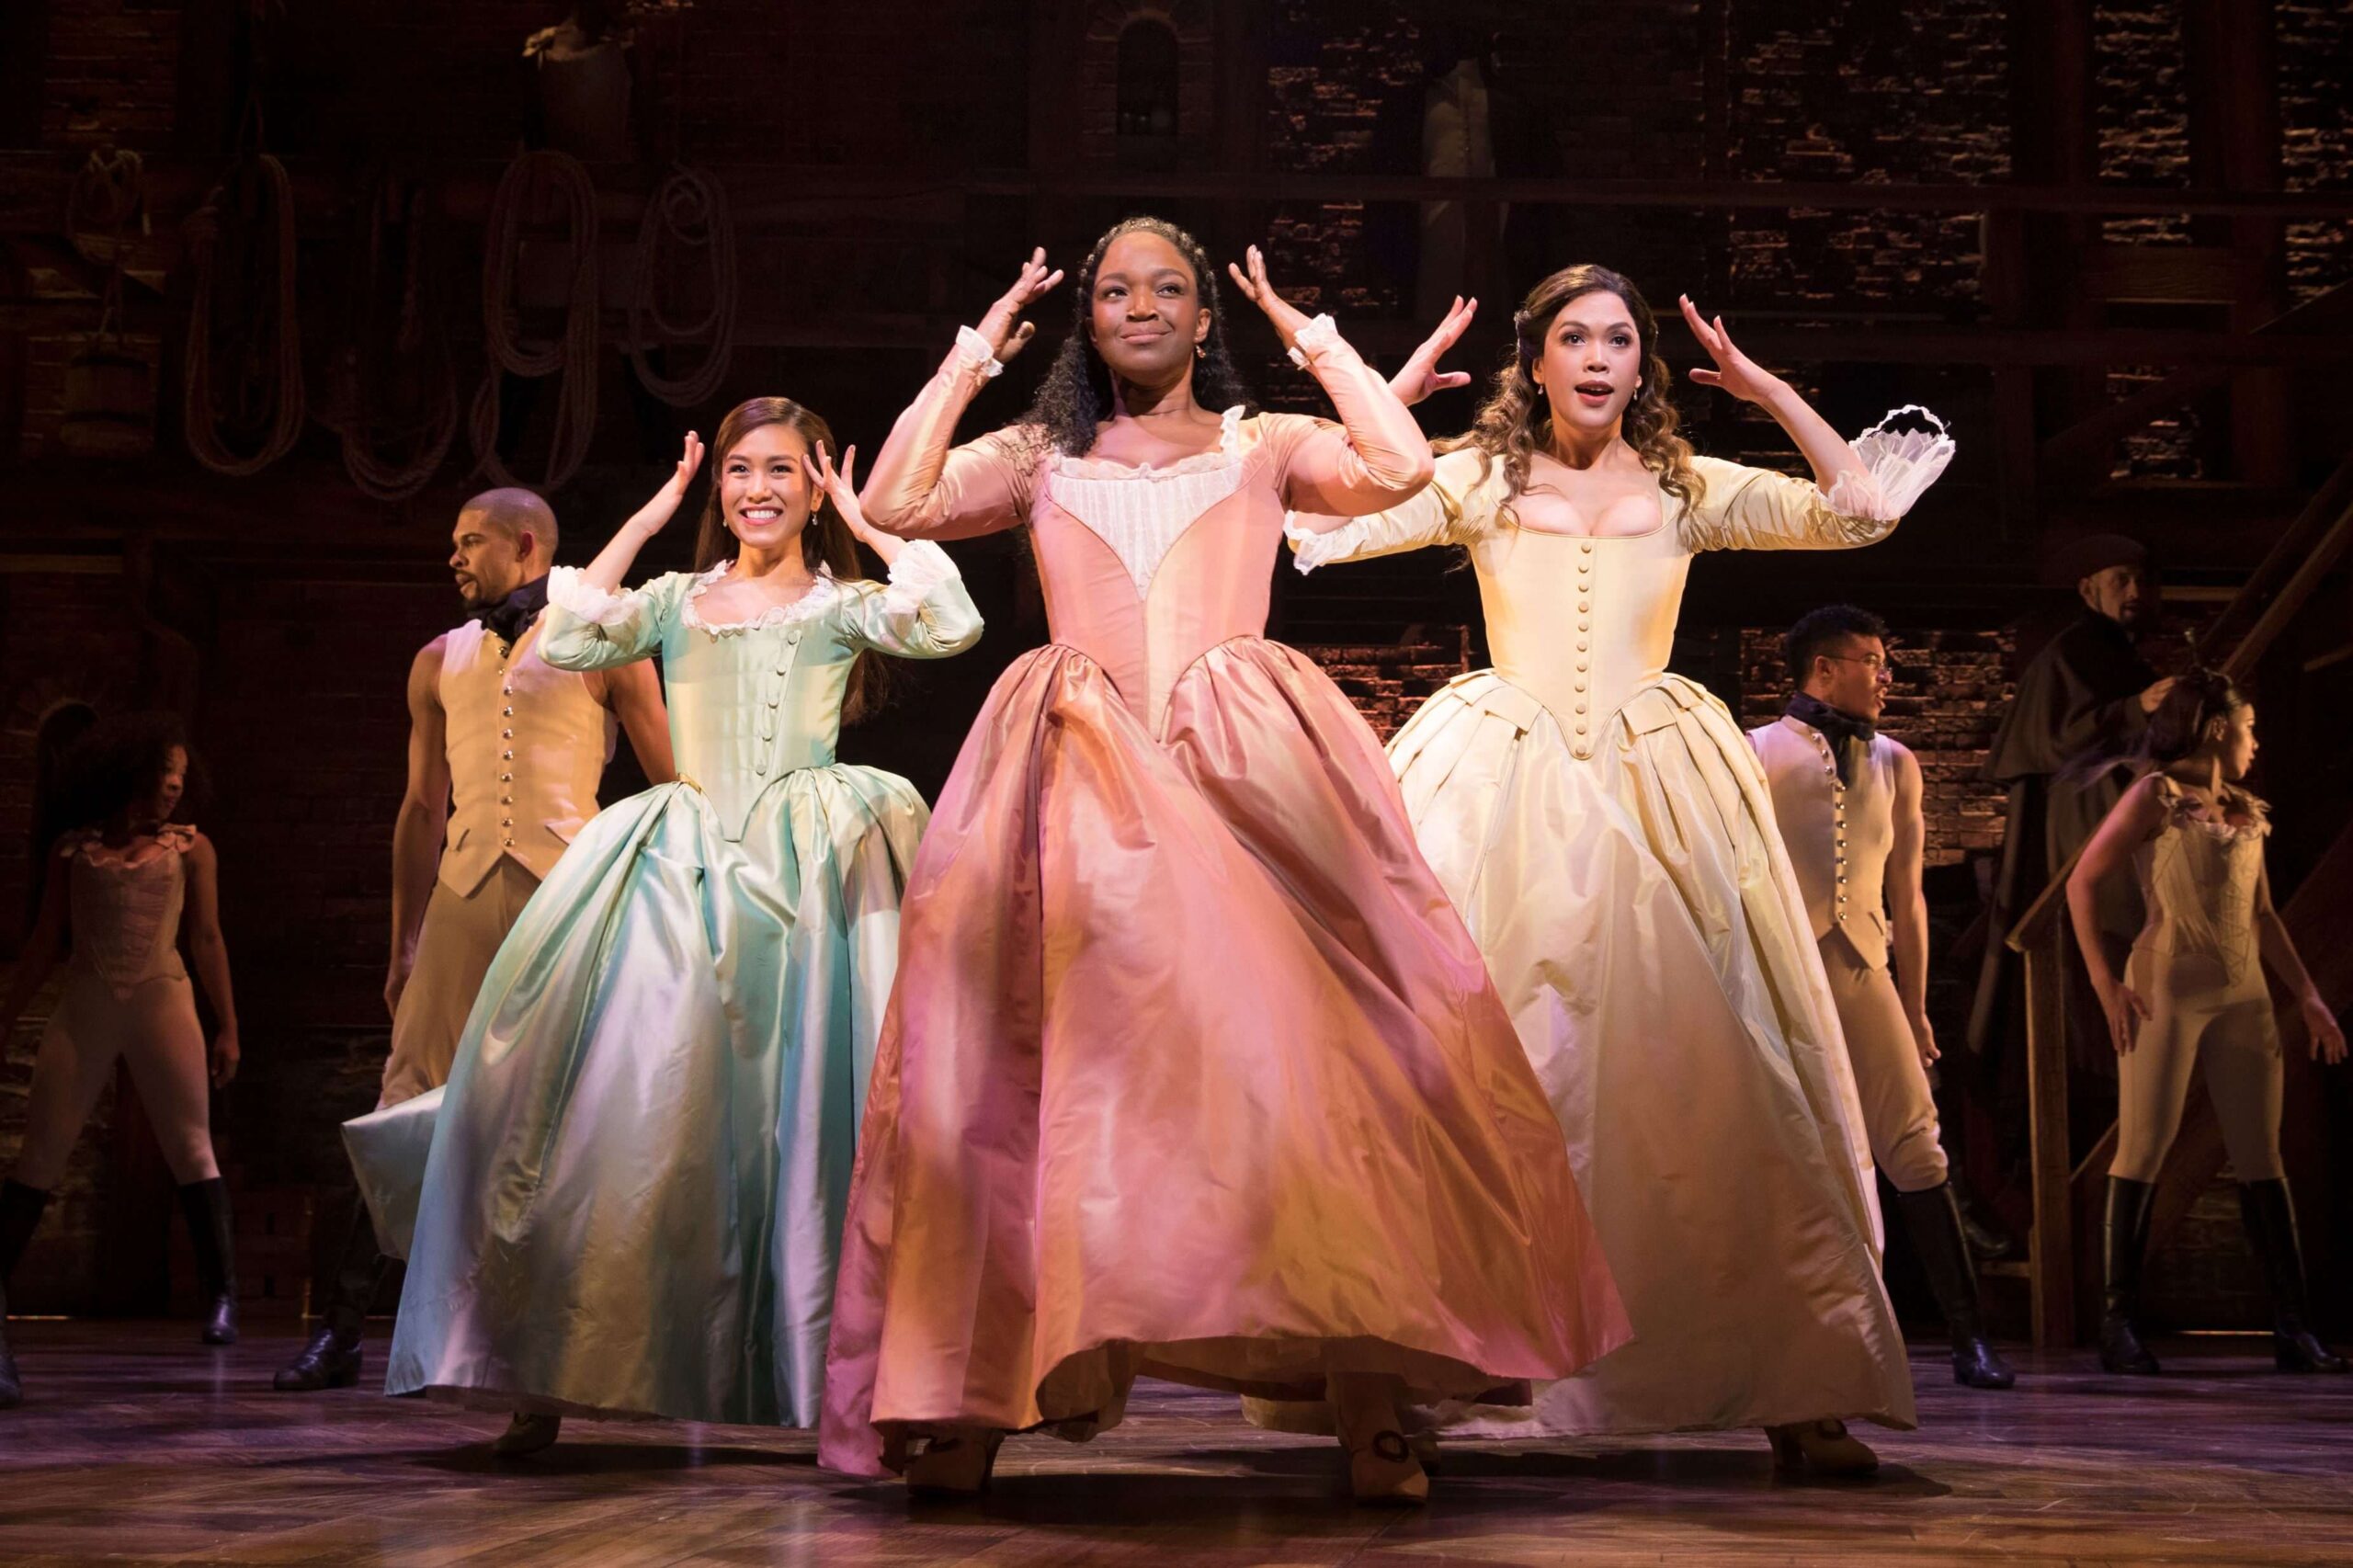 The three Schuyler sisters in London's West End production